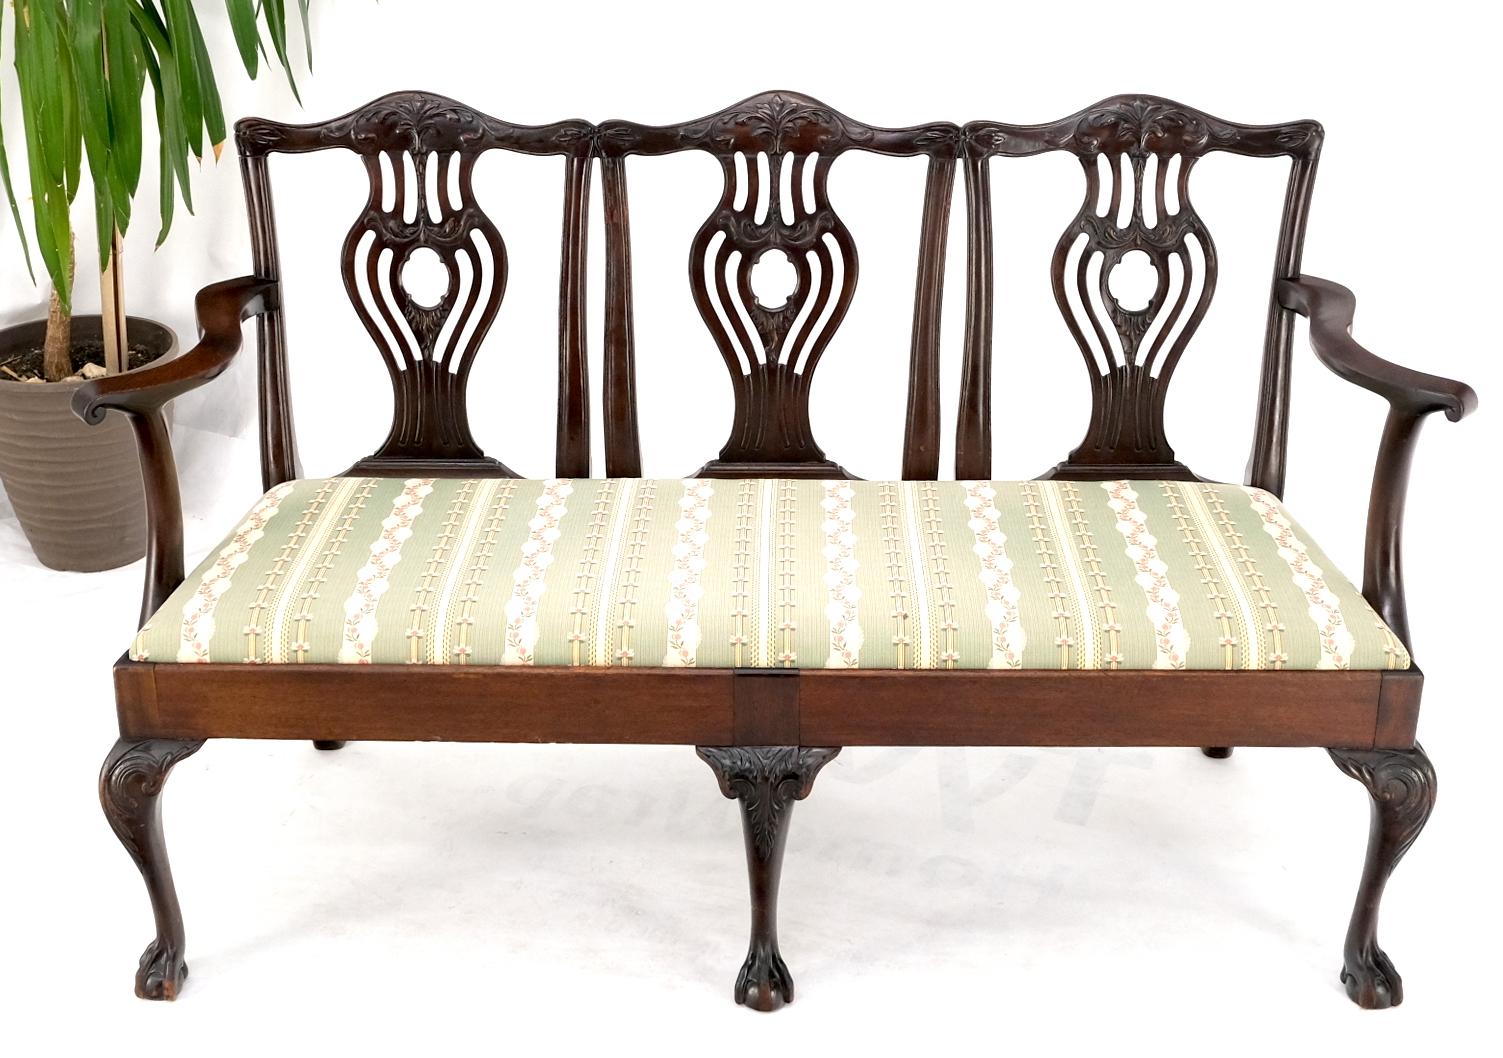 19th Century triple ball & claw armchair style settee bench sofa chippendale.